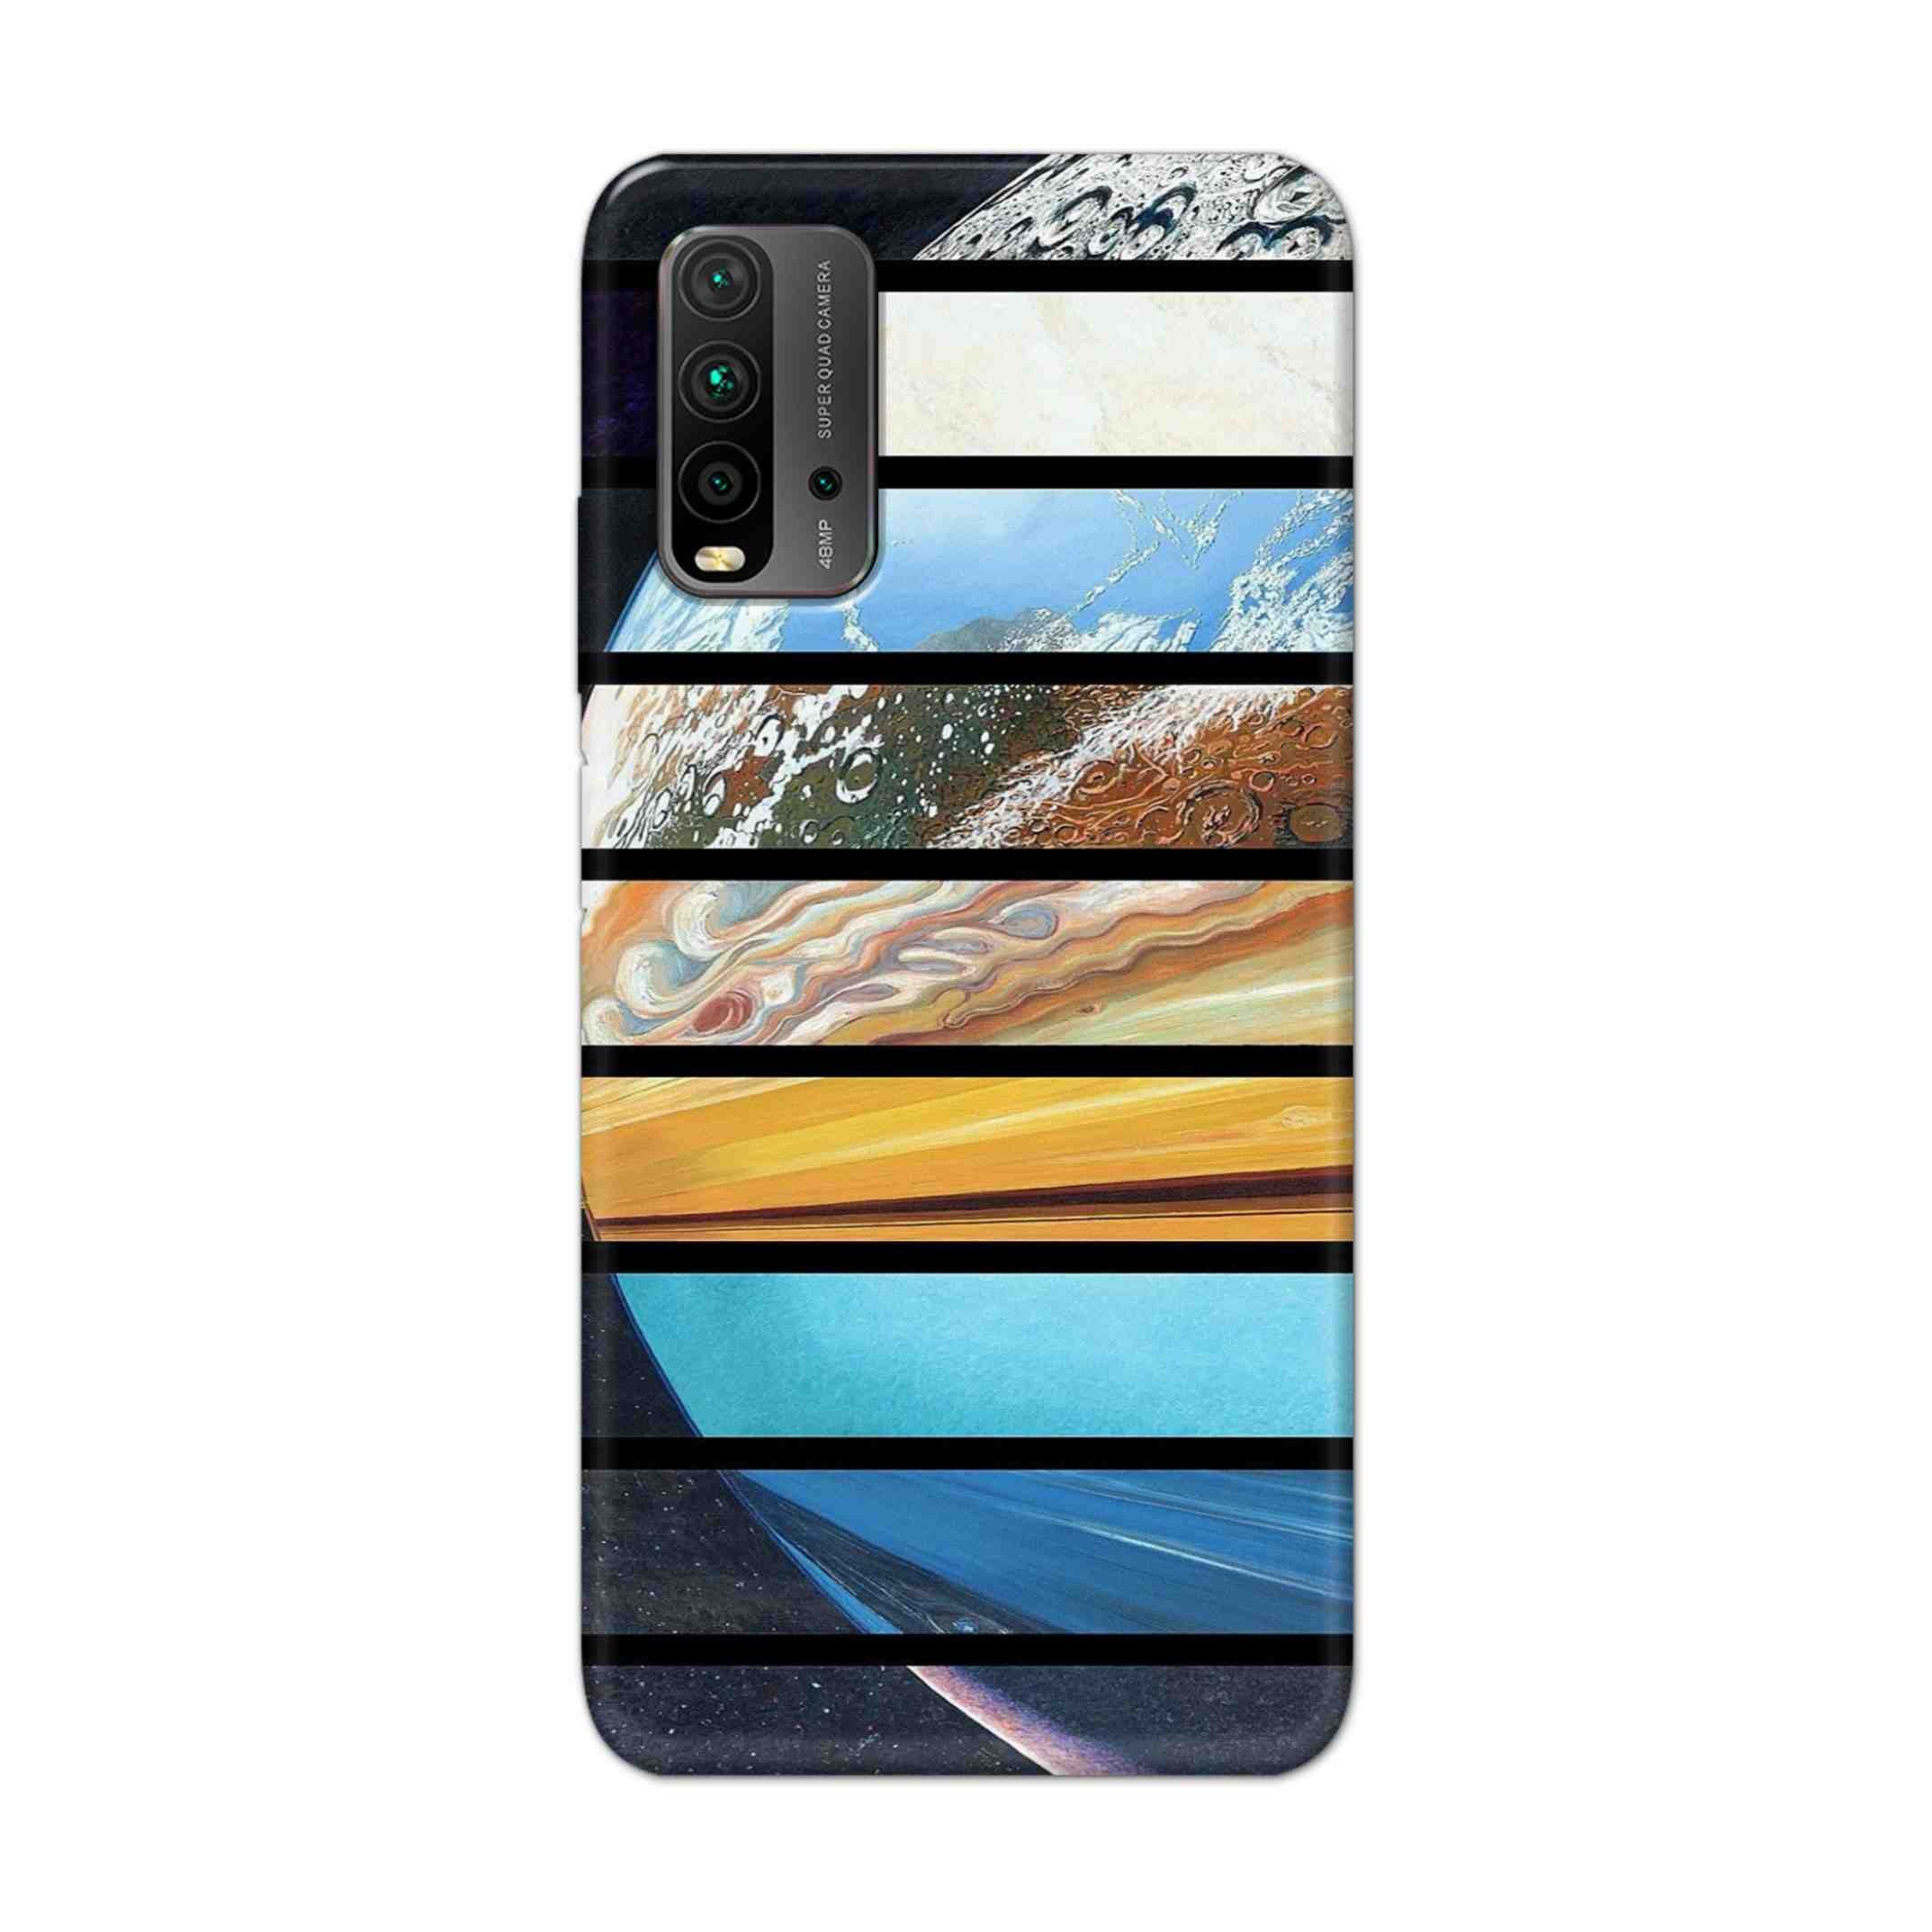 Buy Colourful Earth Hard Back Mobile Phone Case Cover For Redmi 9 Power Online